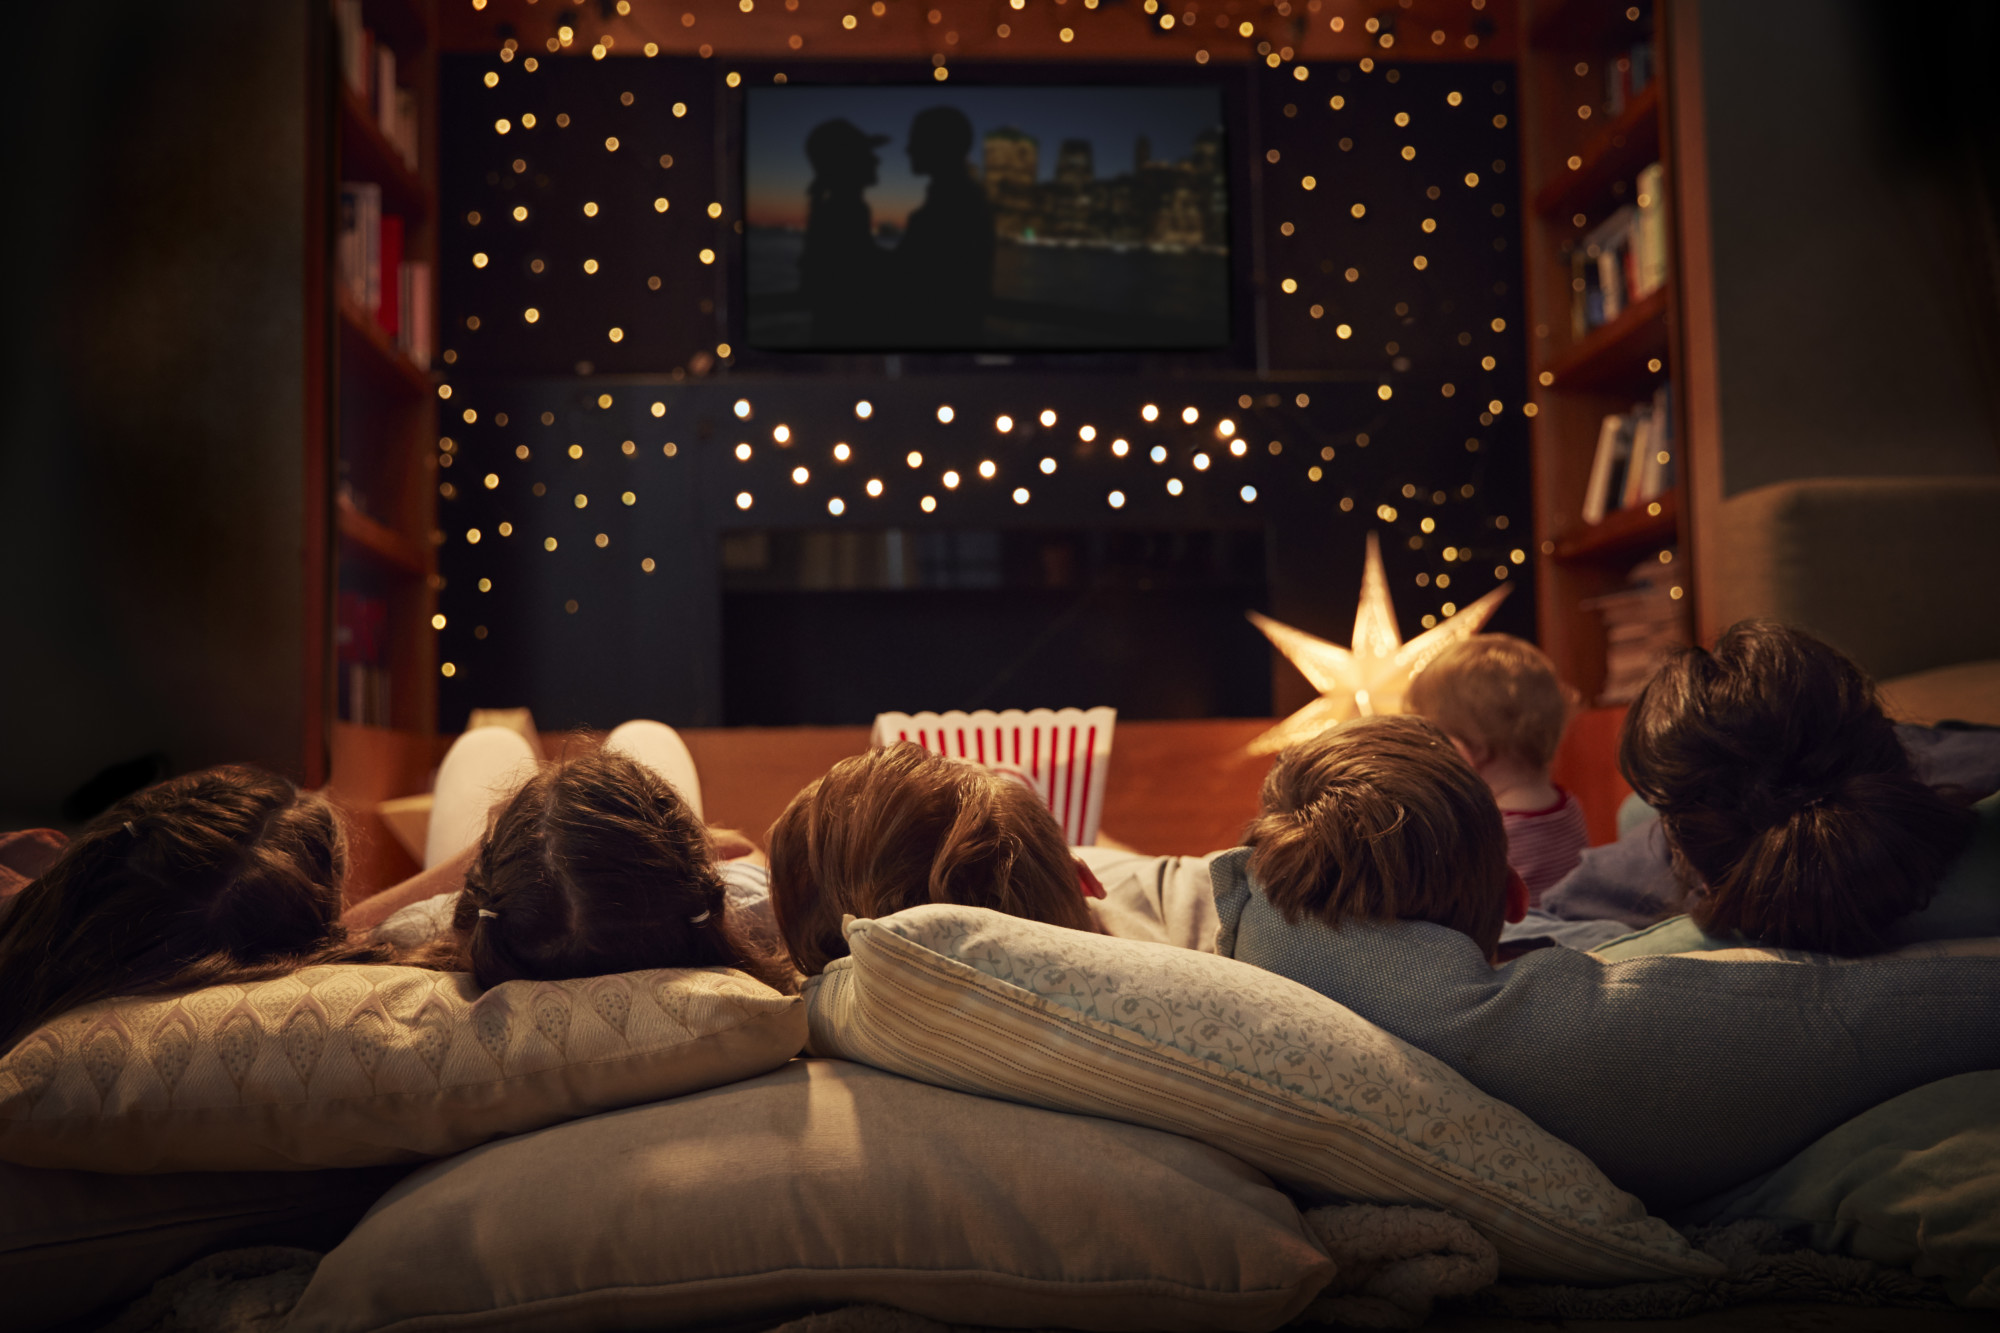 Spending Quality Time With Your Family The Top Family Night Ideas